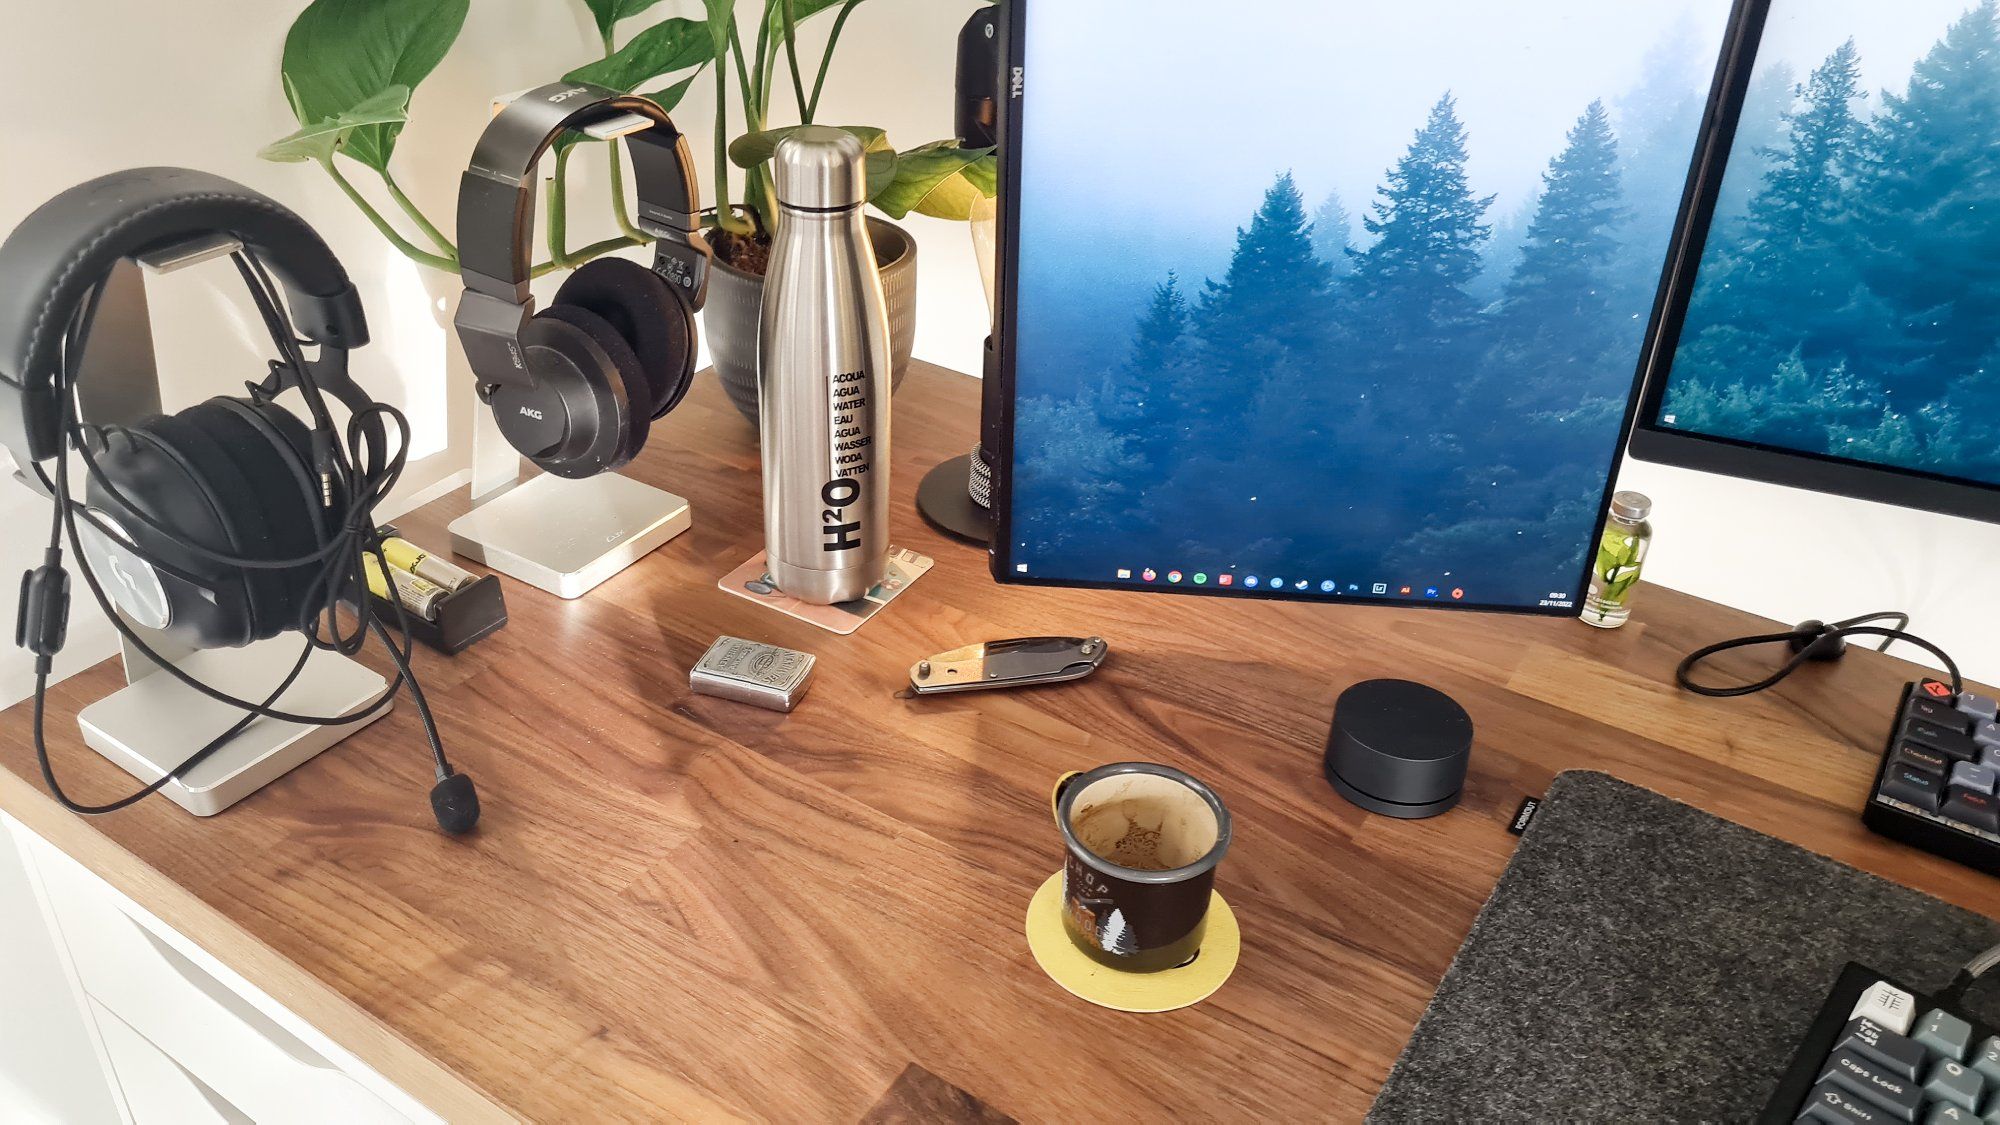 A home office desk setup with a pair of headphones, coffee mug, water bottle, one vertical, and one horizontal monitor